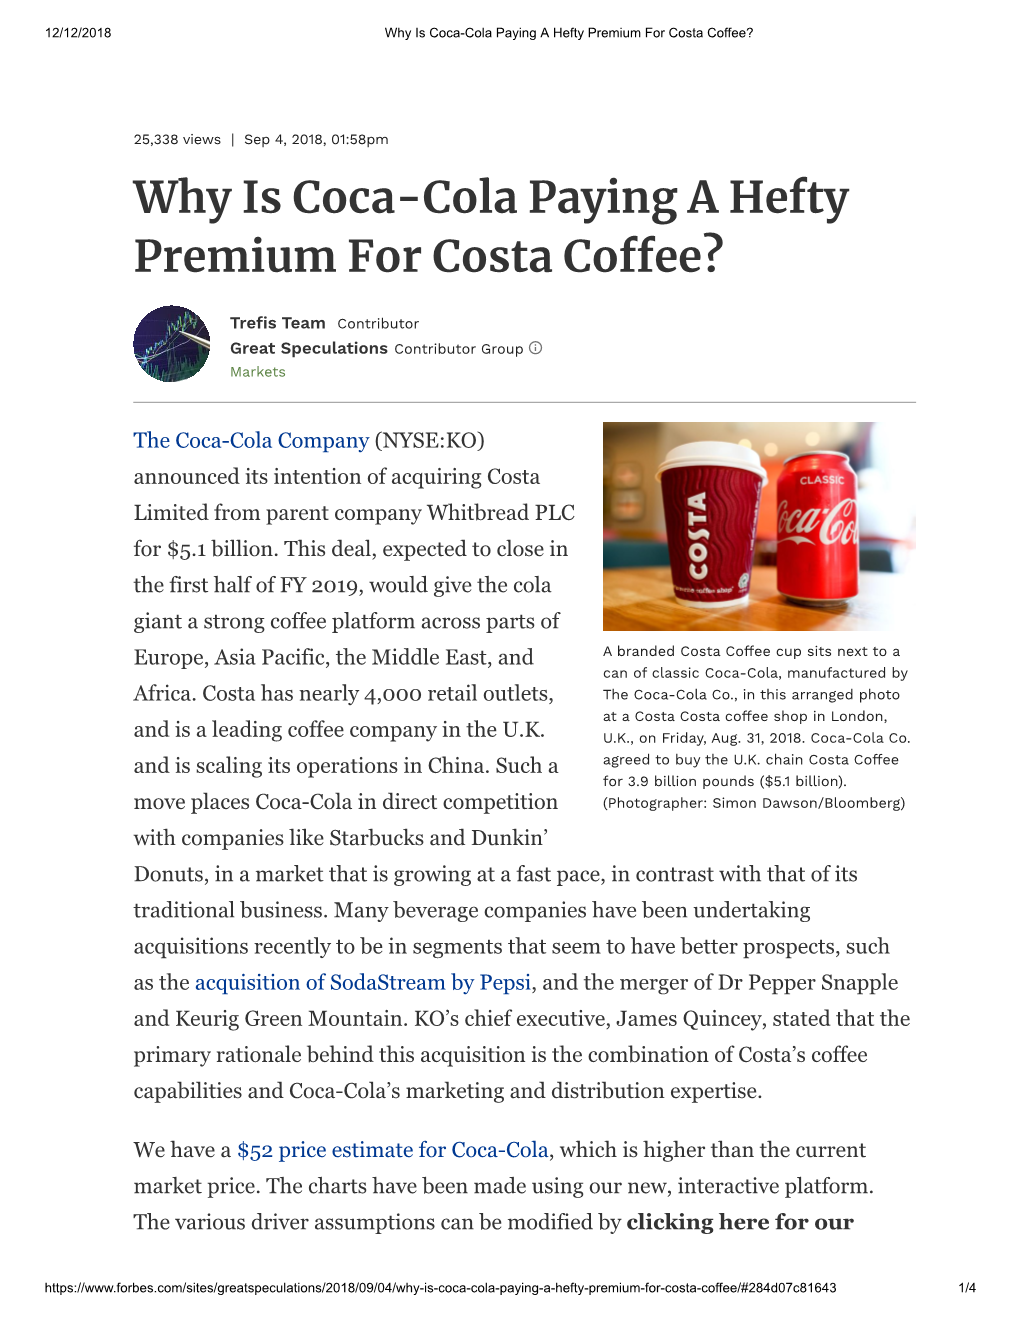 Why Is Coca-Cola Paying a Hefty Premium for Costa Coffee?